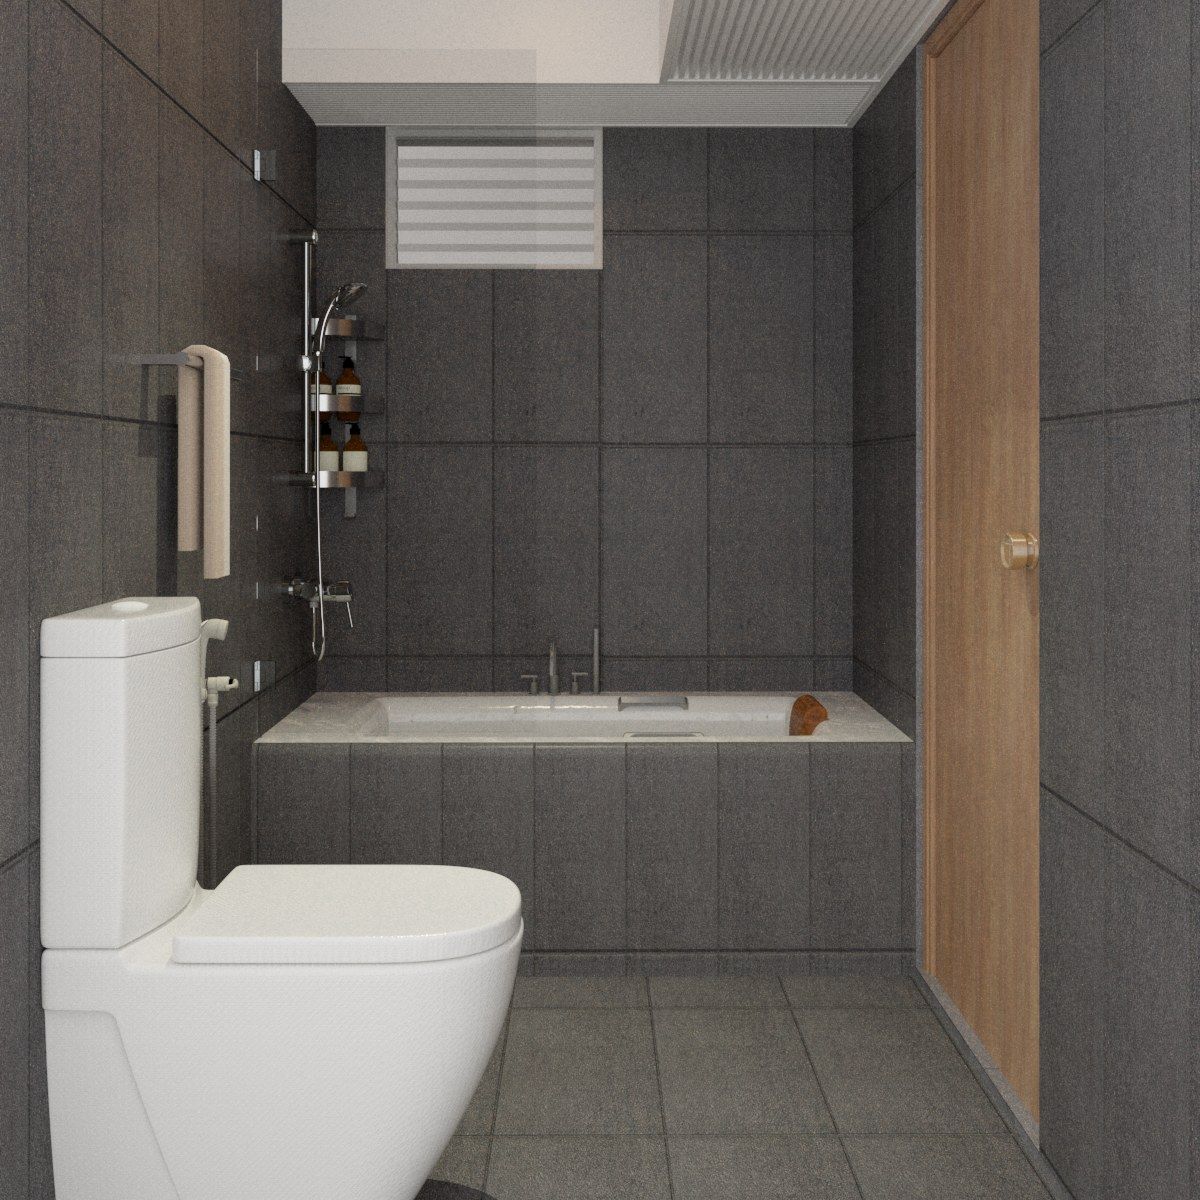 Contemporary Dark Grey Ceramic Tiles With A Matte Finish